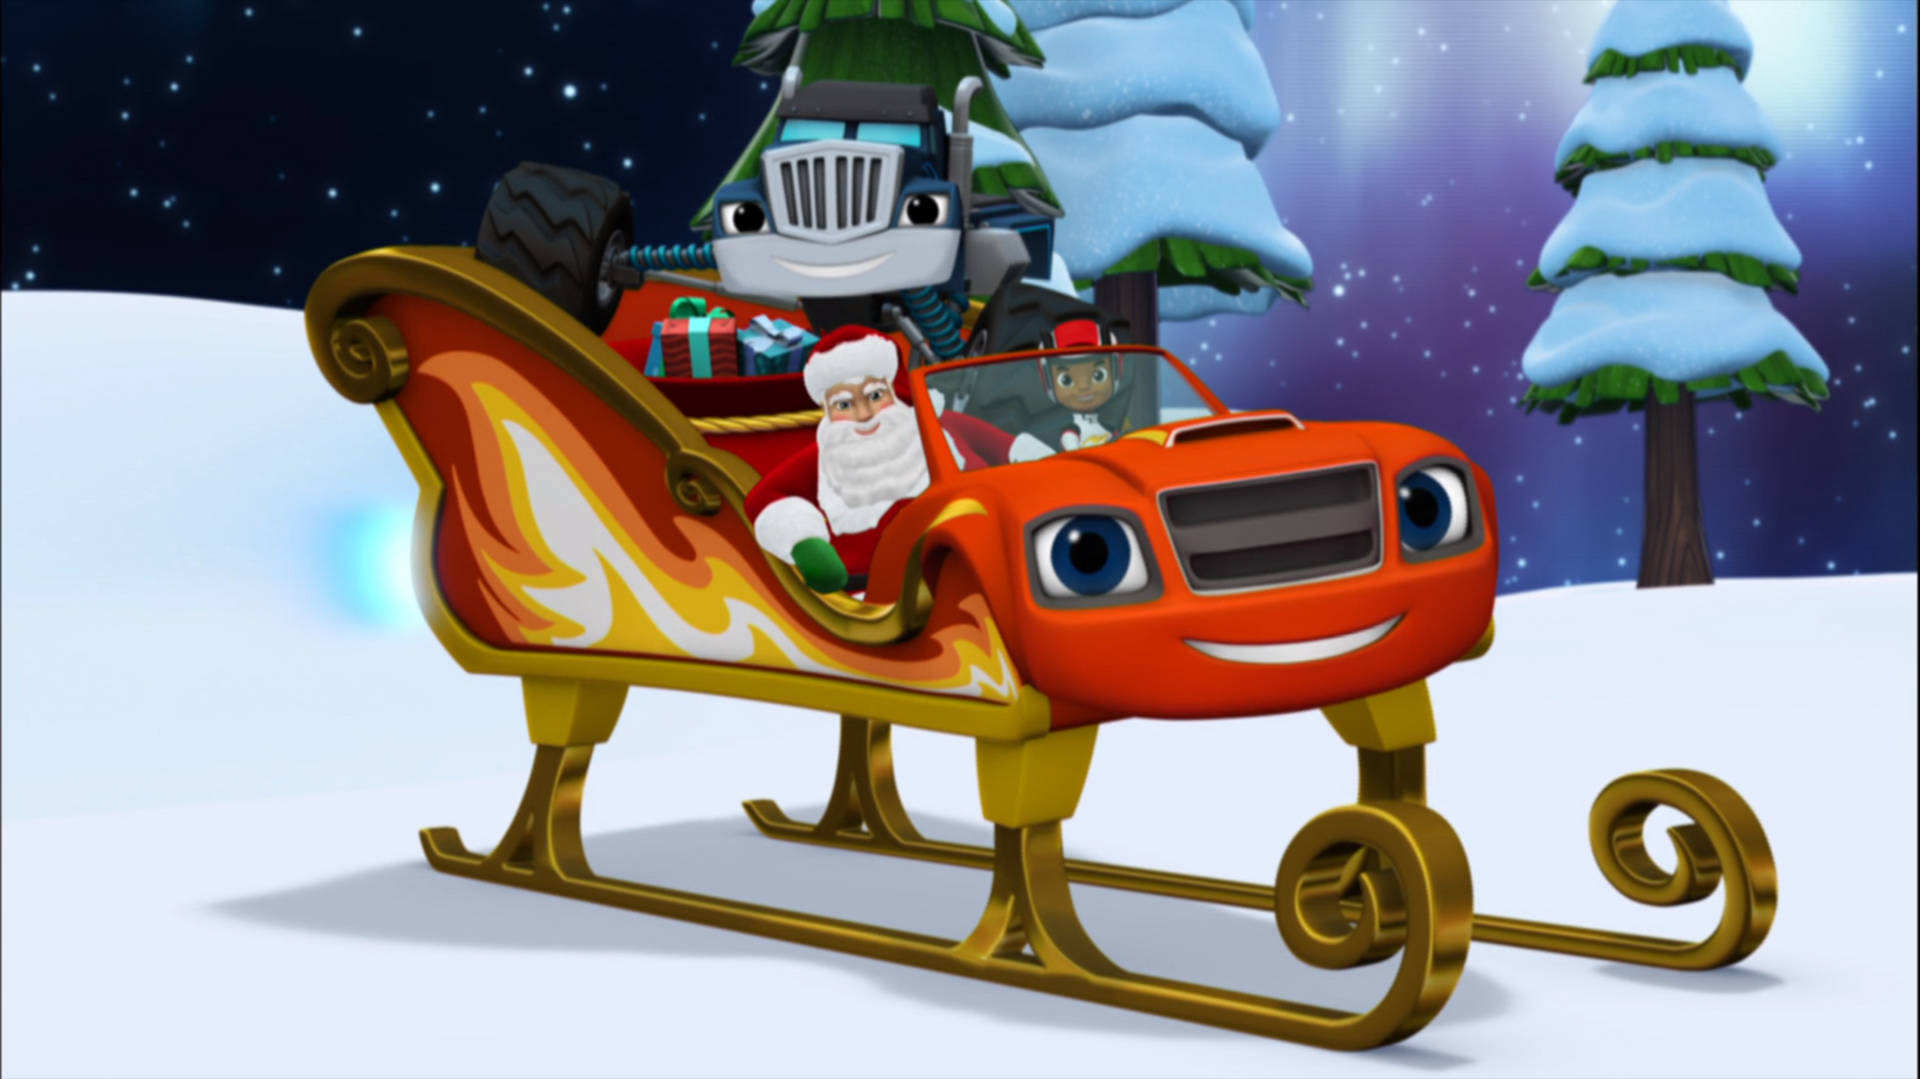 Blaze And The Monster Machines Sleigh